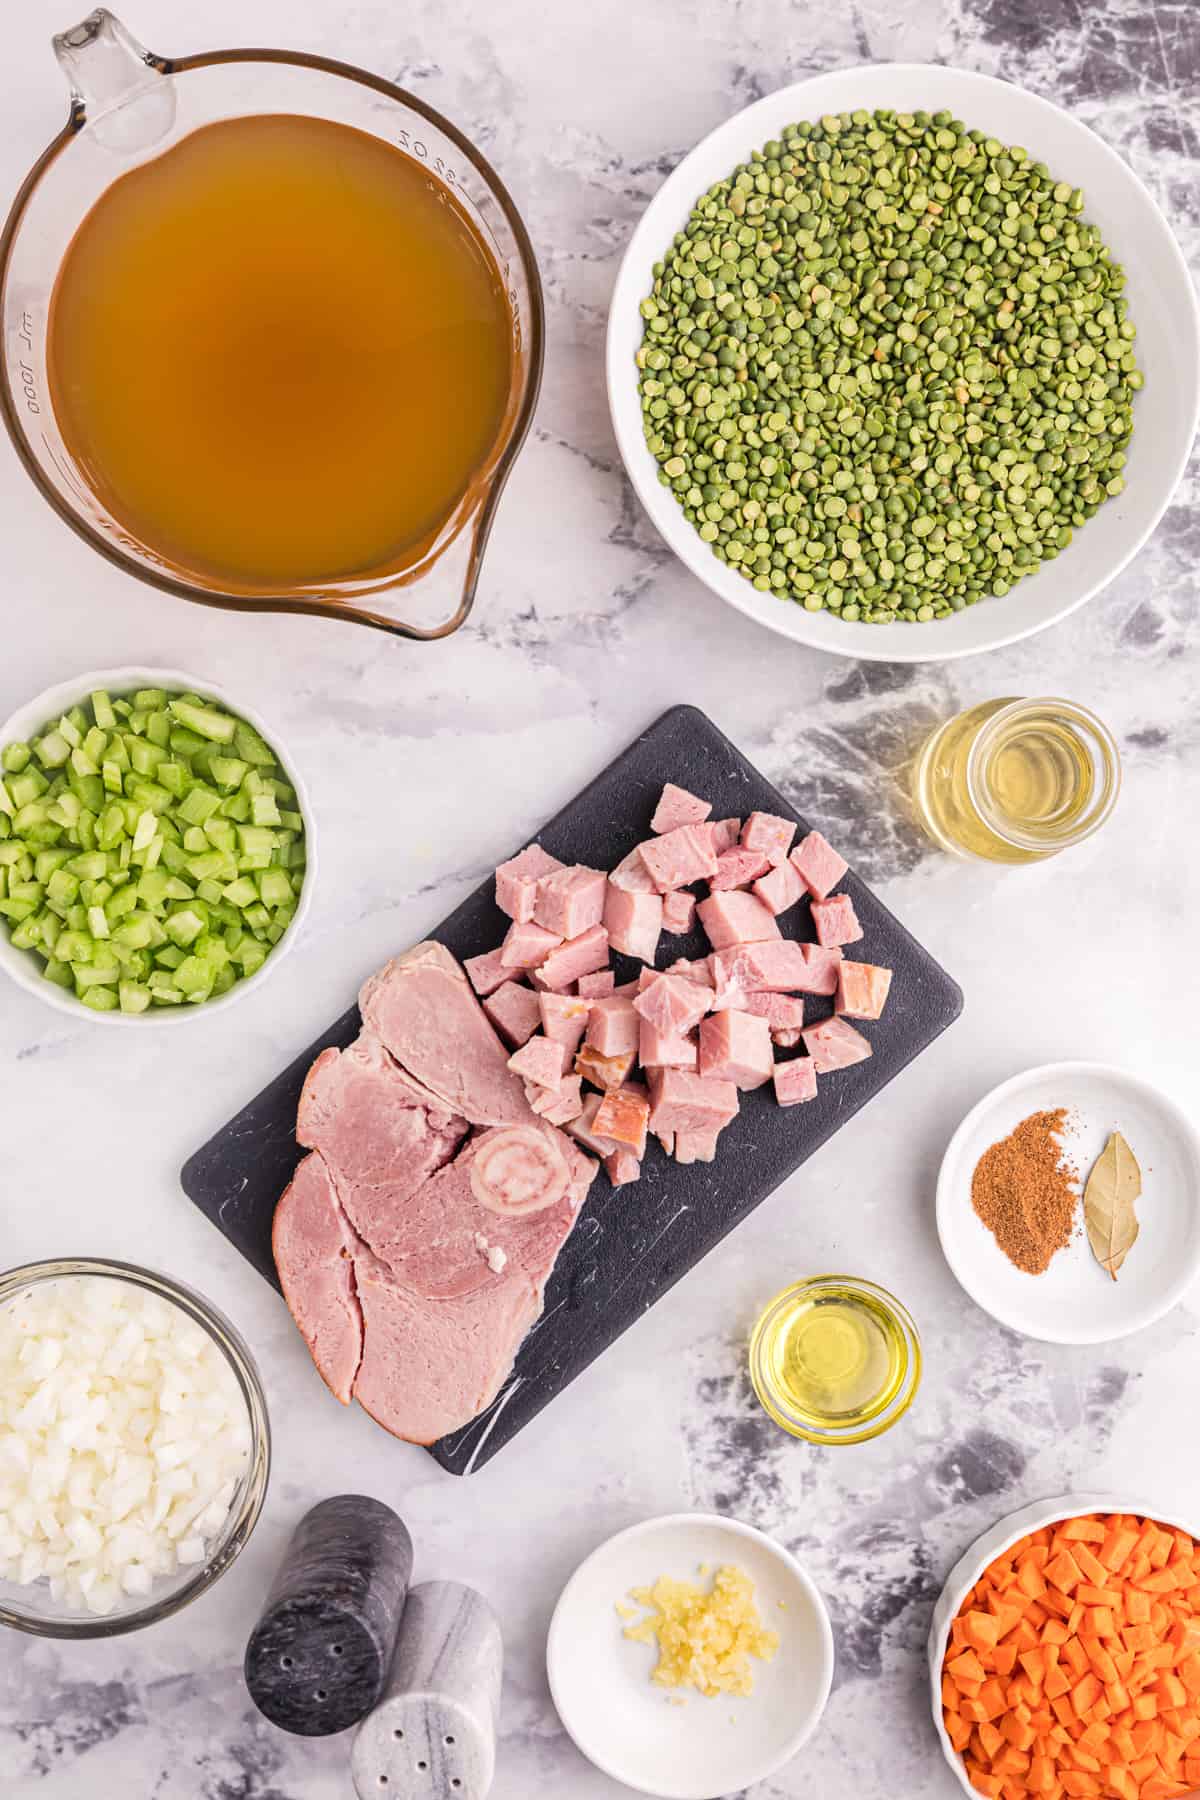 The ingredients for split pea soup with ham are presented on a white surface.